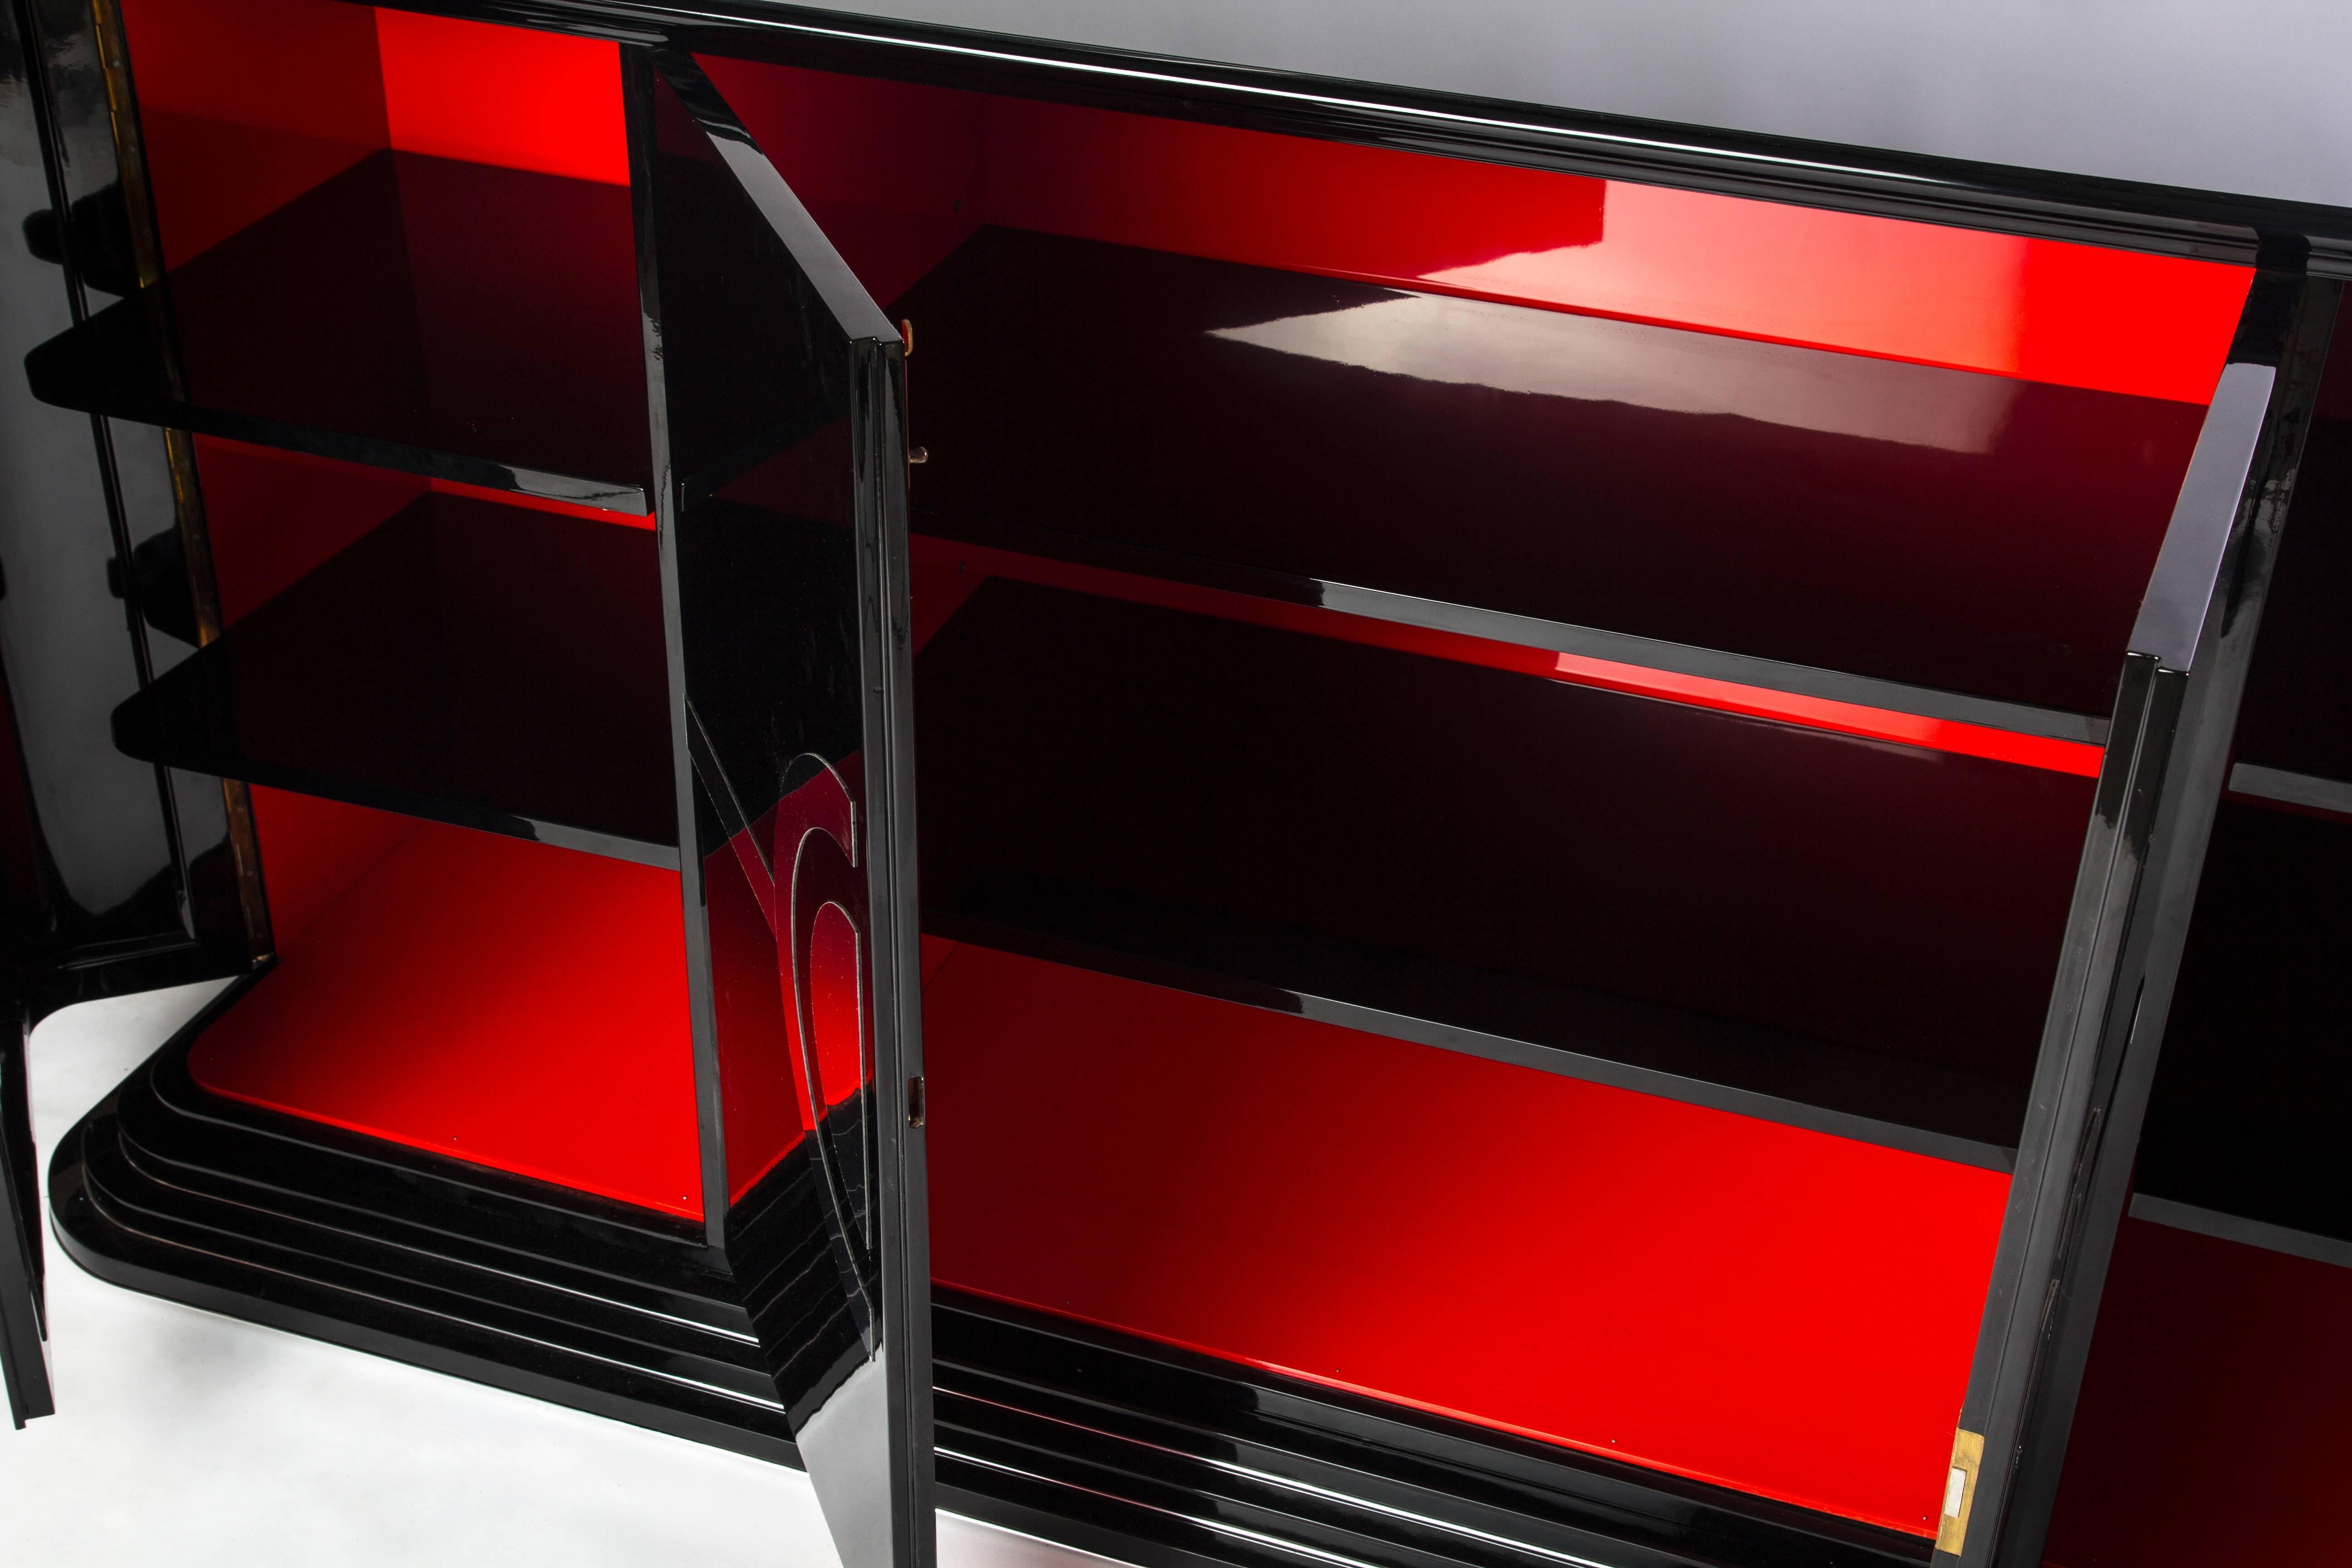 Luxurious Art Deco sideboard features a high gloss black lacquer finish with a cascading stair foot, three swing doors, chrome lines and fixtures, and a luscious cherry interior.